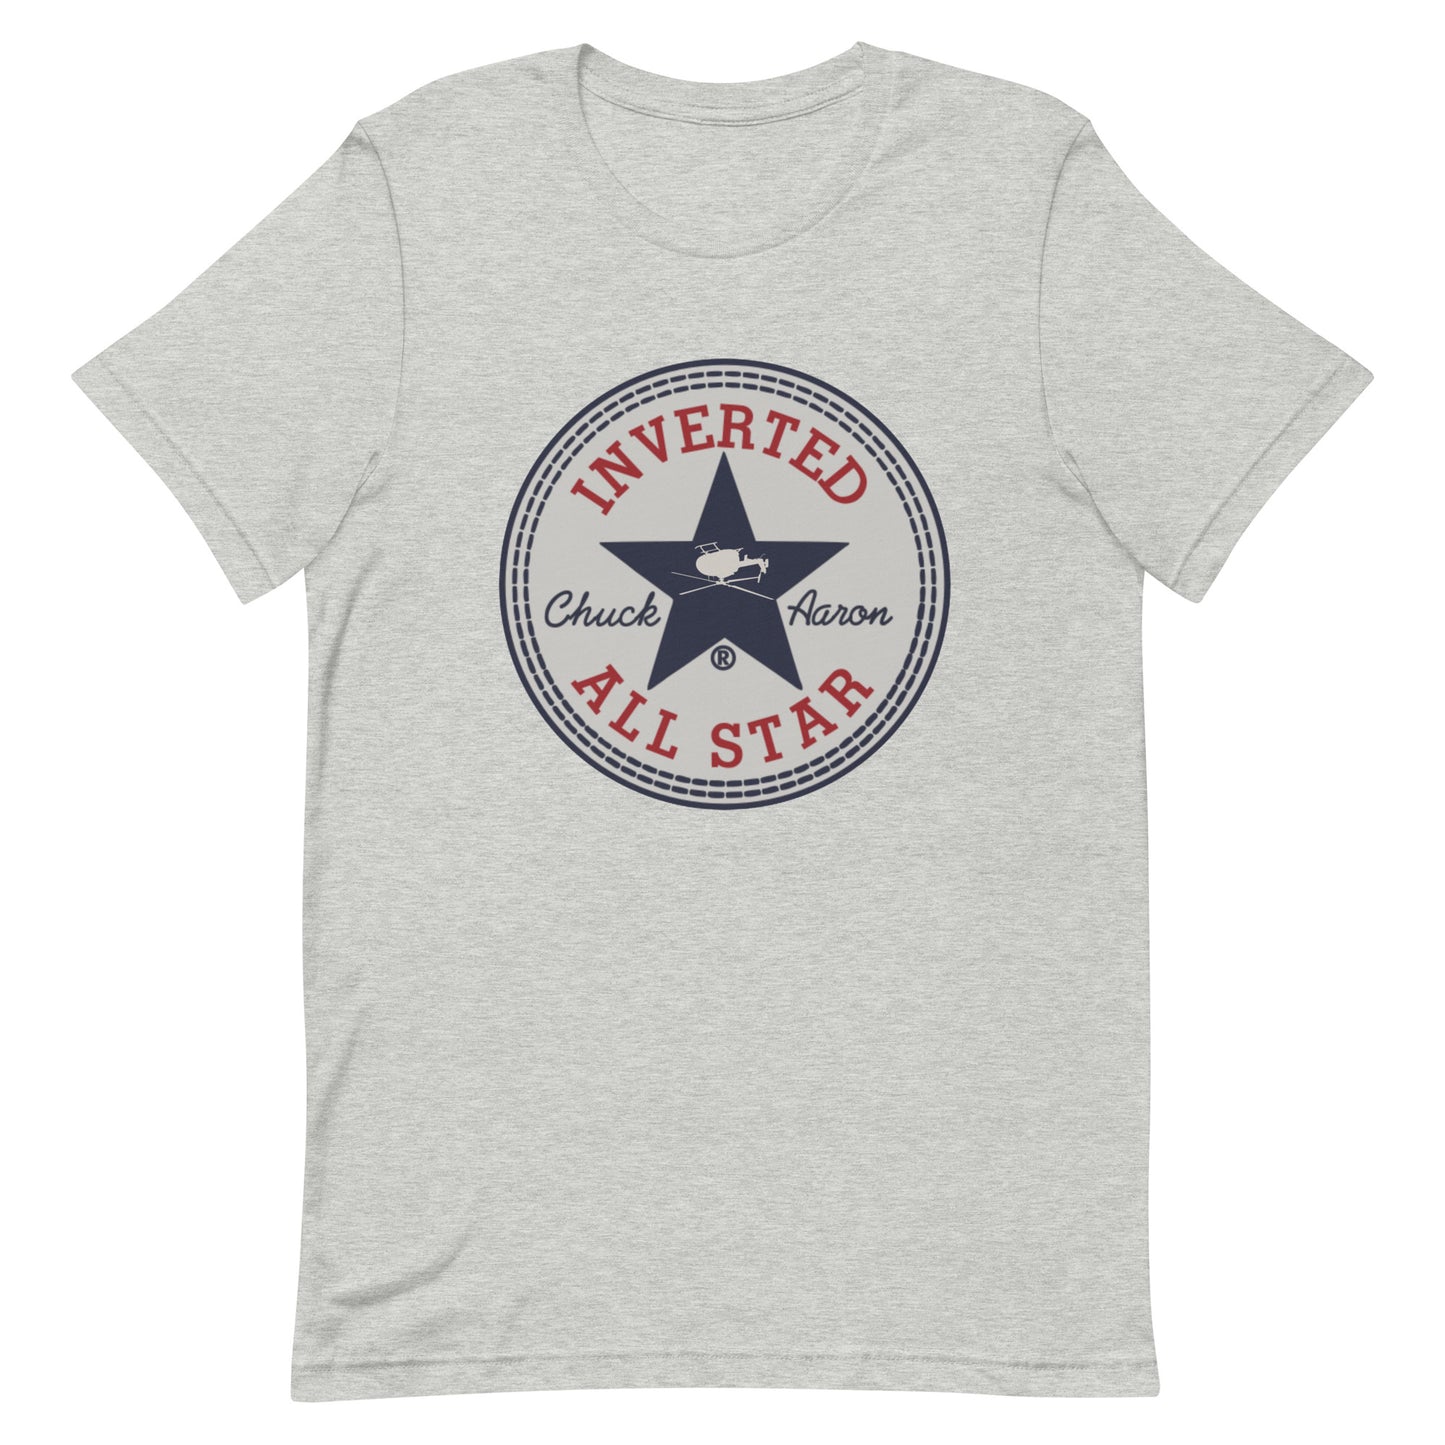 Inverted All-Star Tee